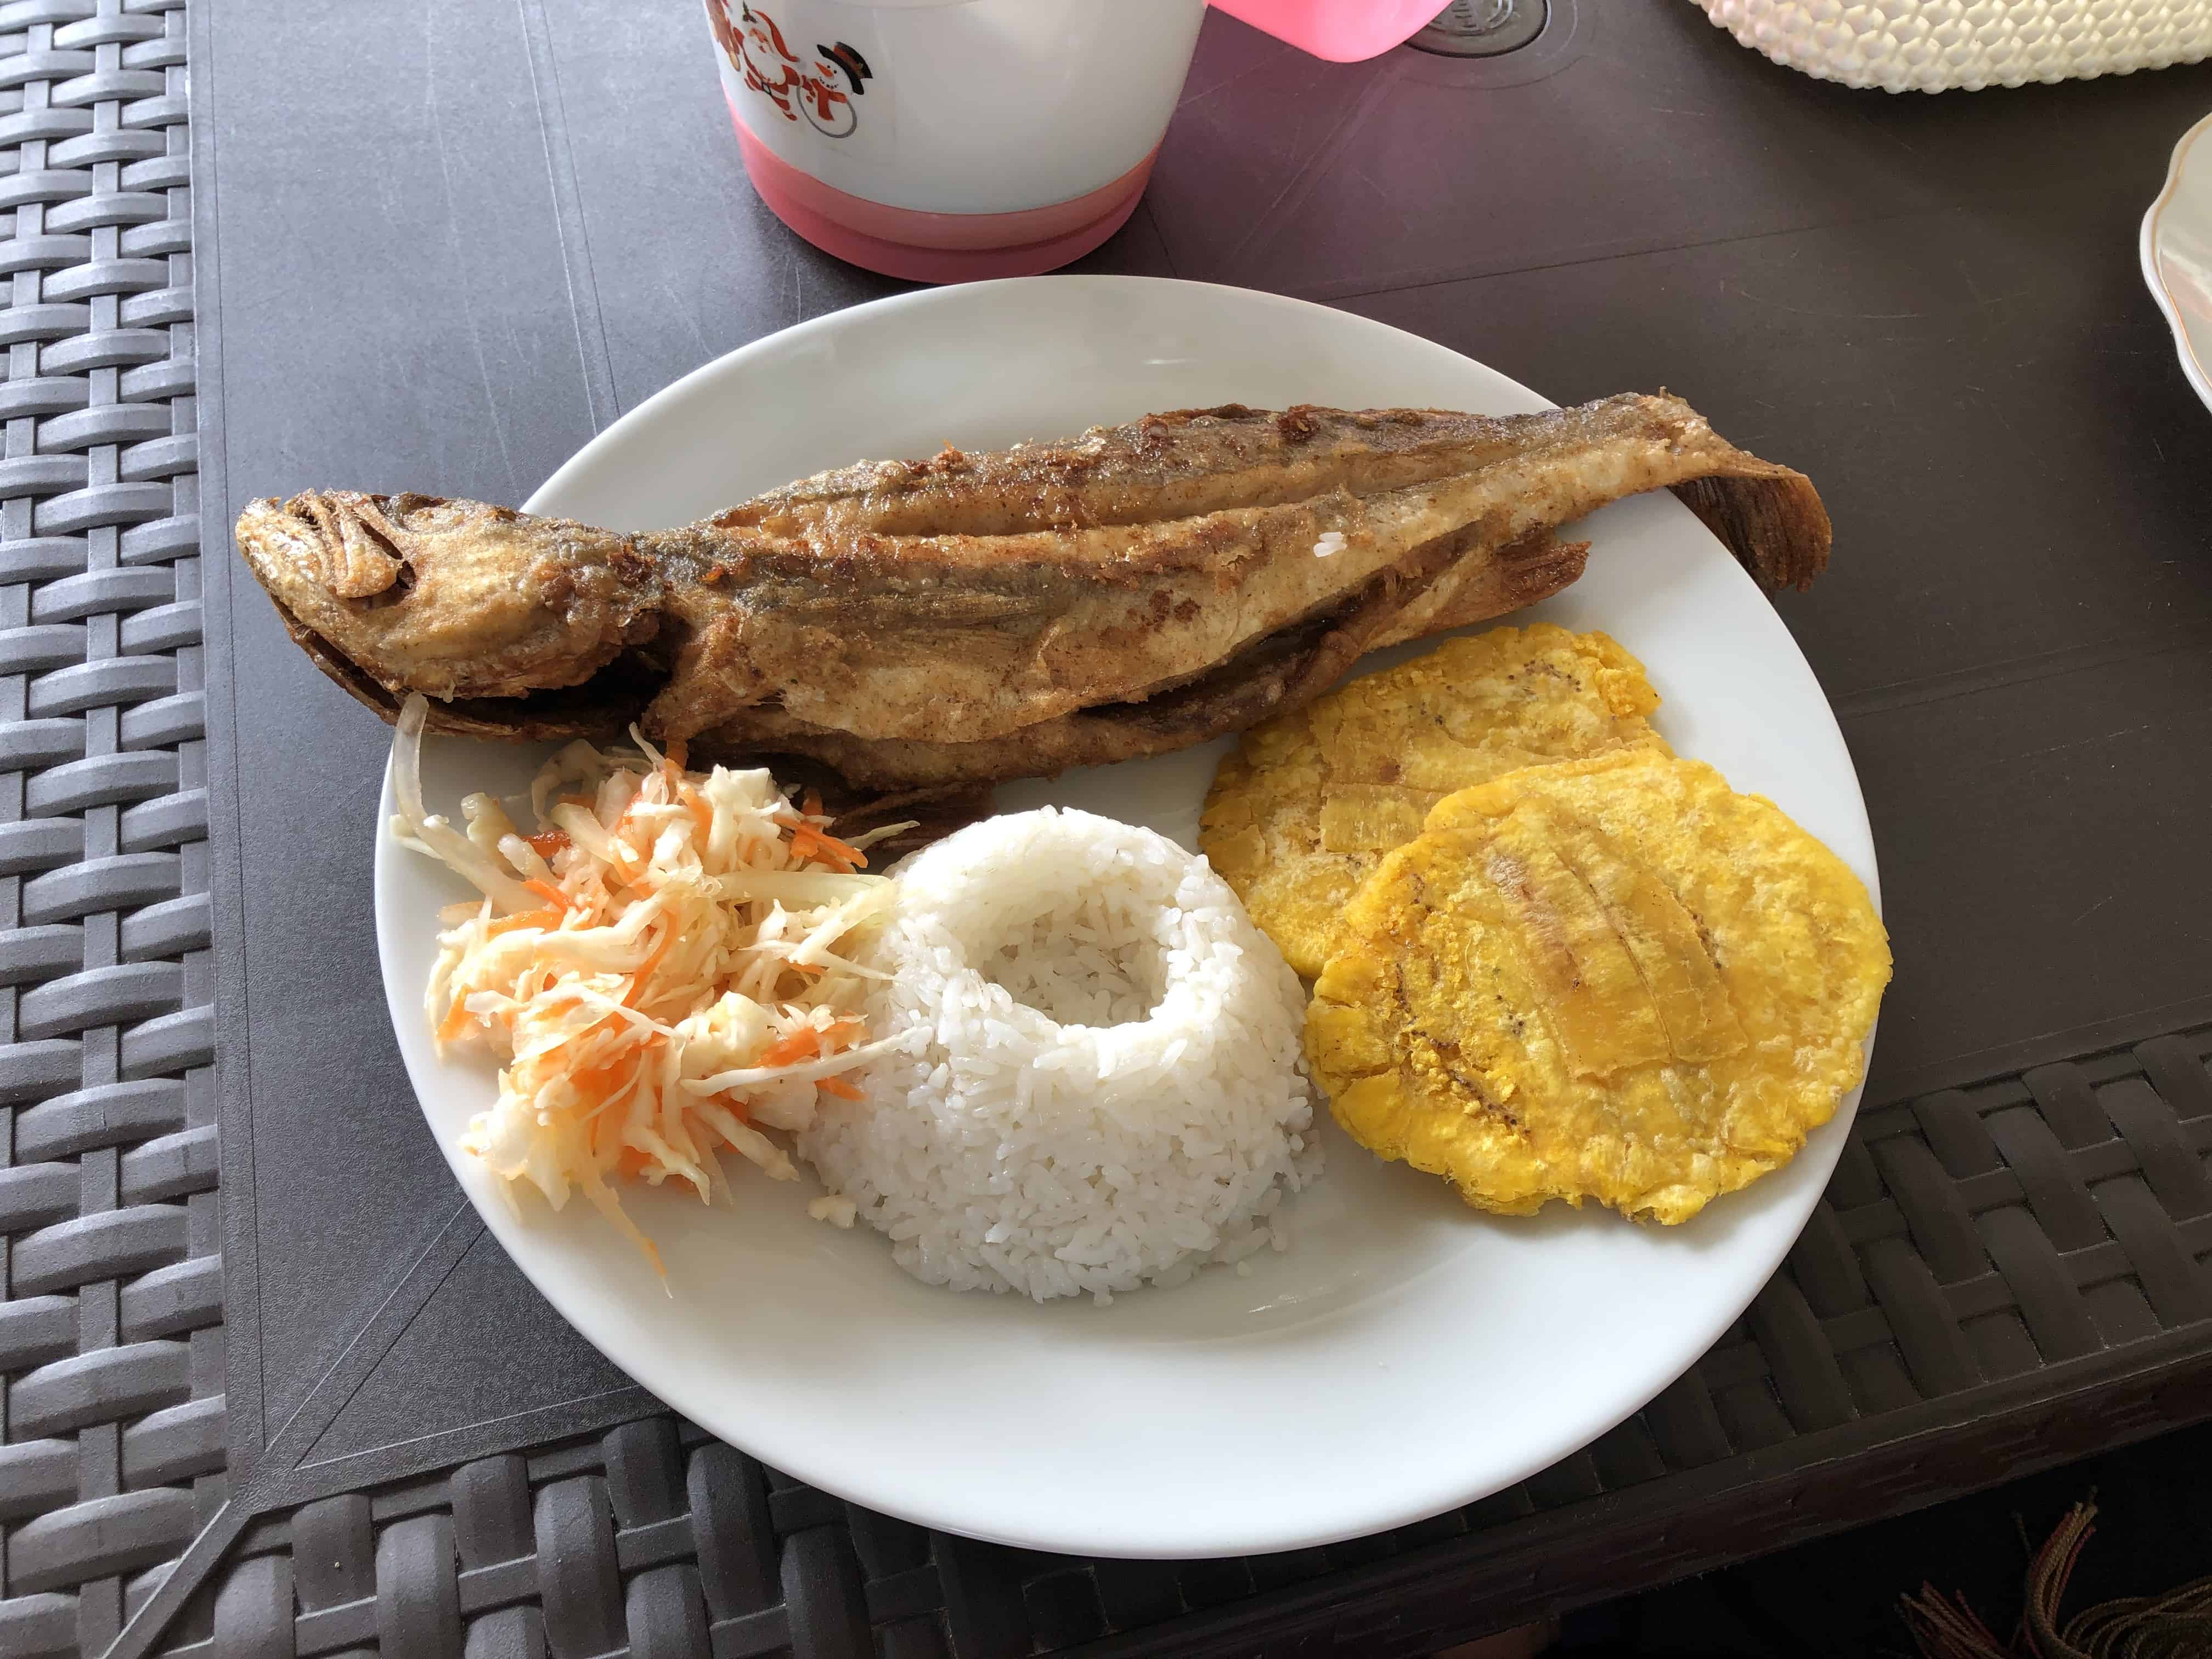 Fried fish at Hotel Relief in San Cipriano, Valle del Cauca, Colombia